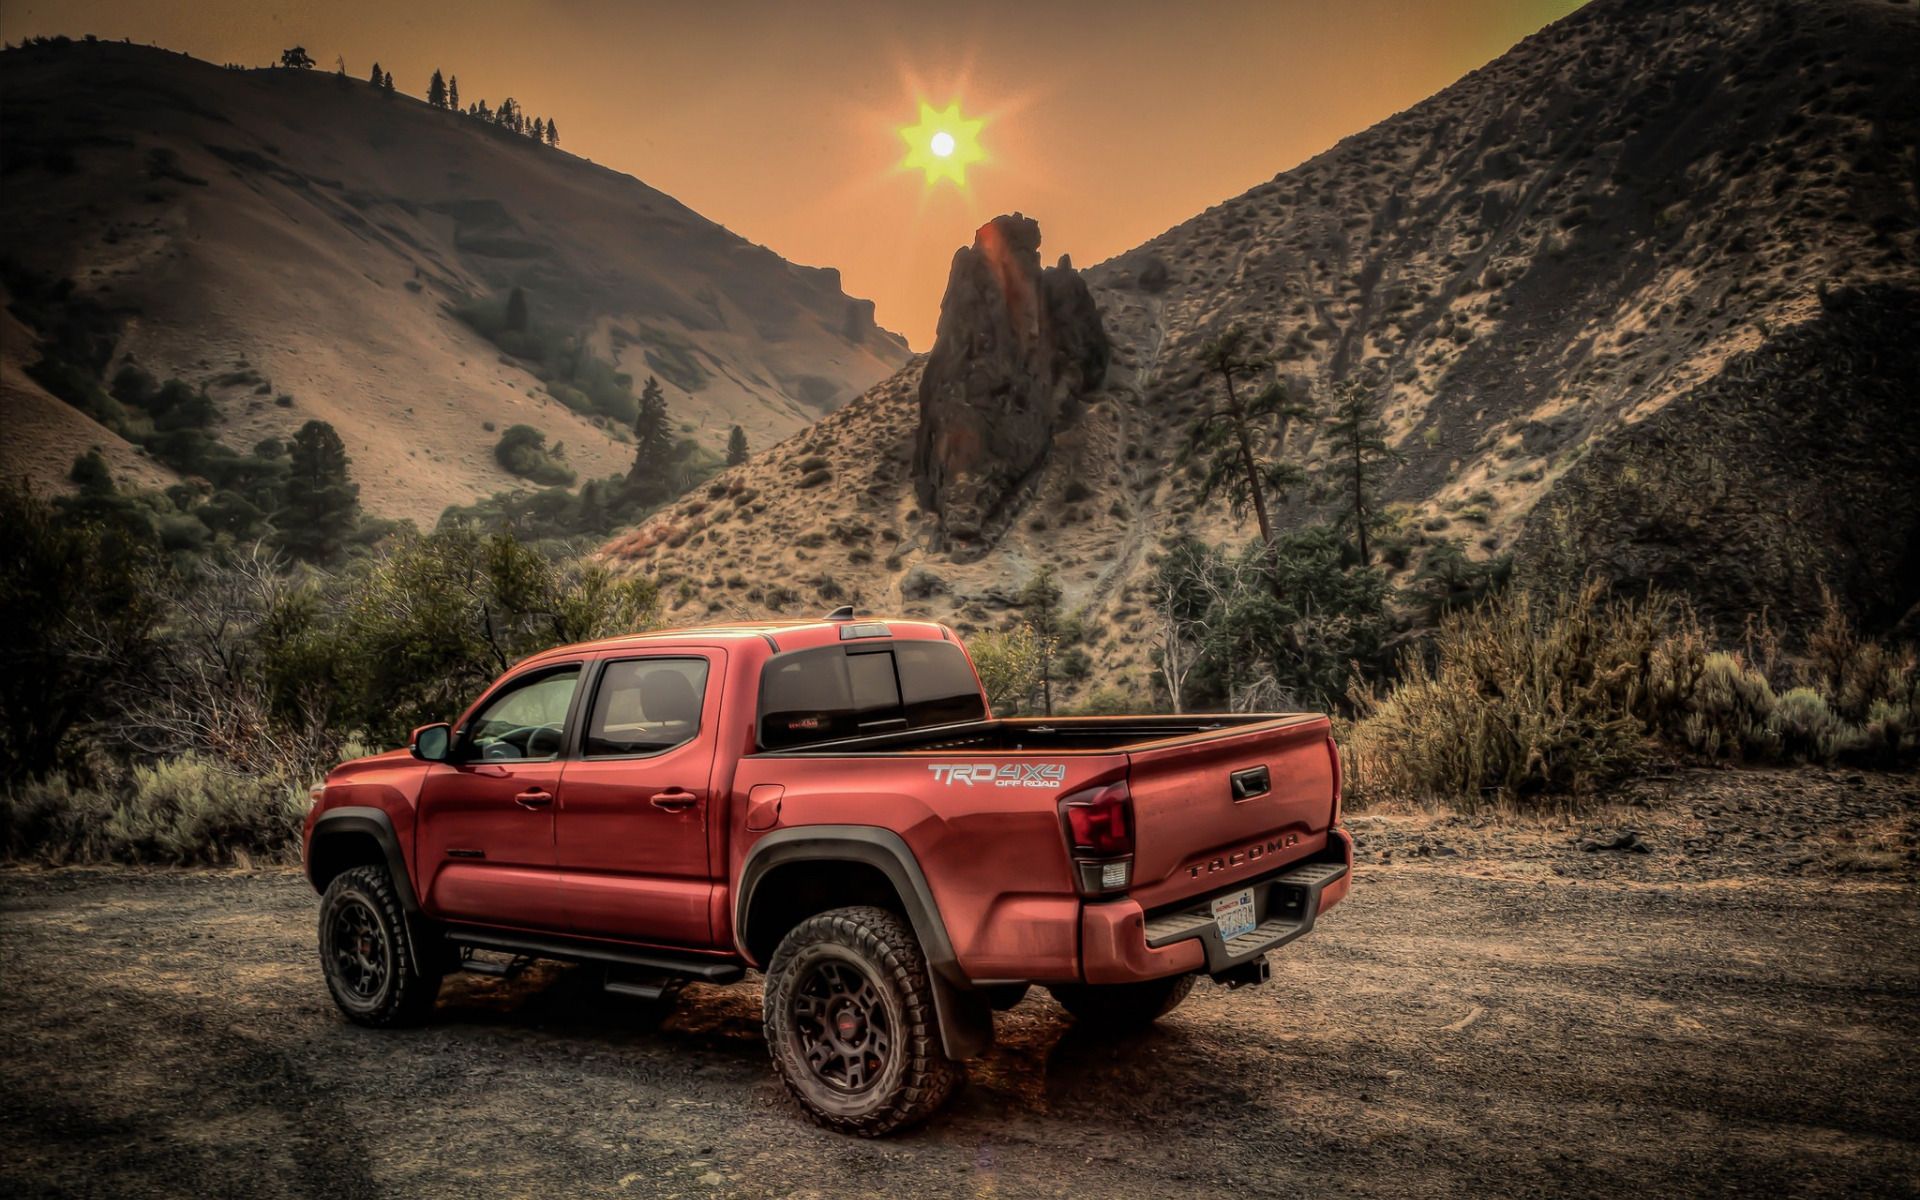 Download wallpaper Toyota Tacoma, rear view, red pickup